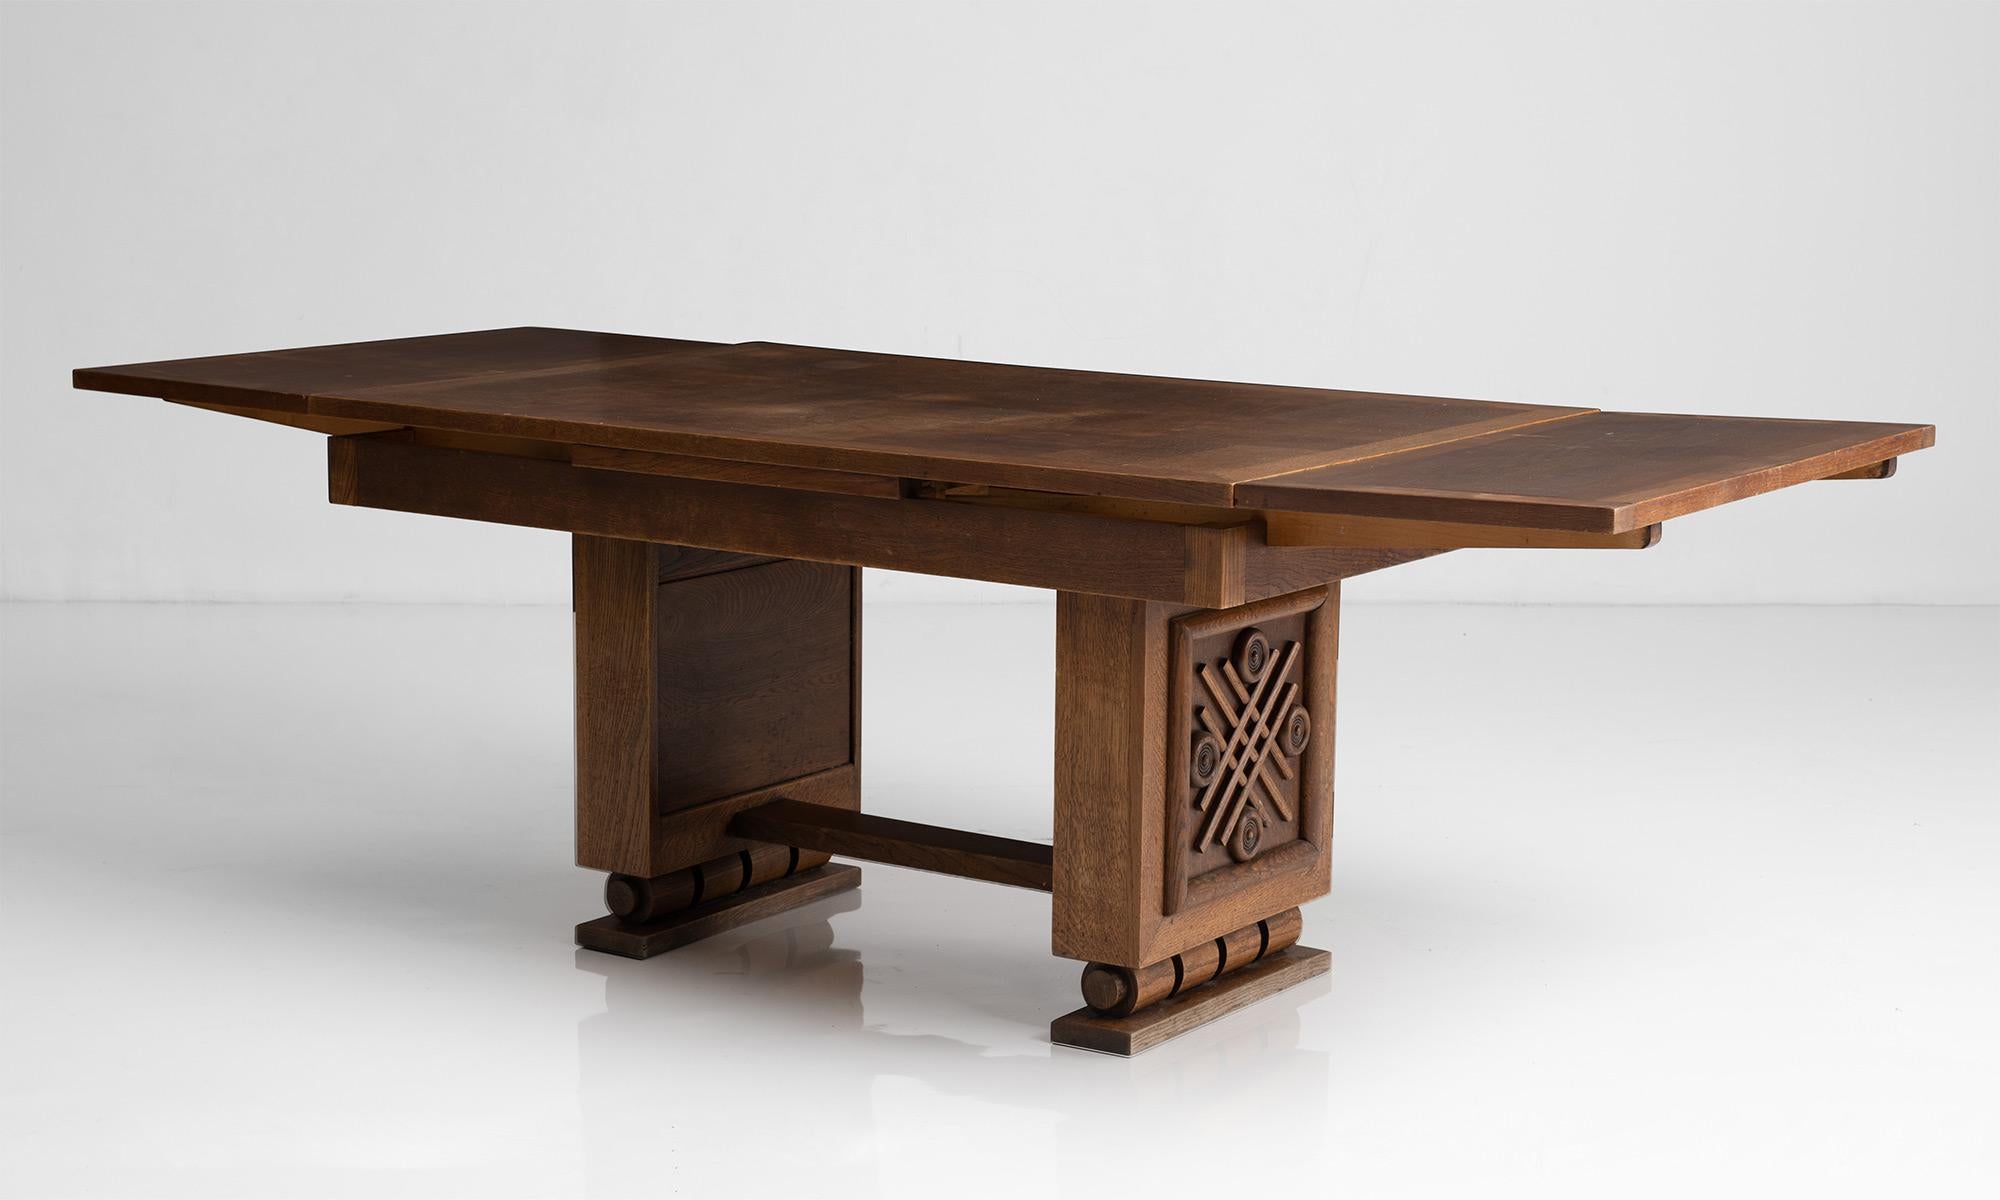 Oak extending dining table / desk.

France circa 1940

Art Deco table constructed in oak with marquetry top and decorative base.

Measures: 55” L / 89.75